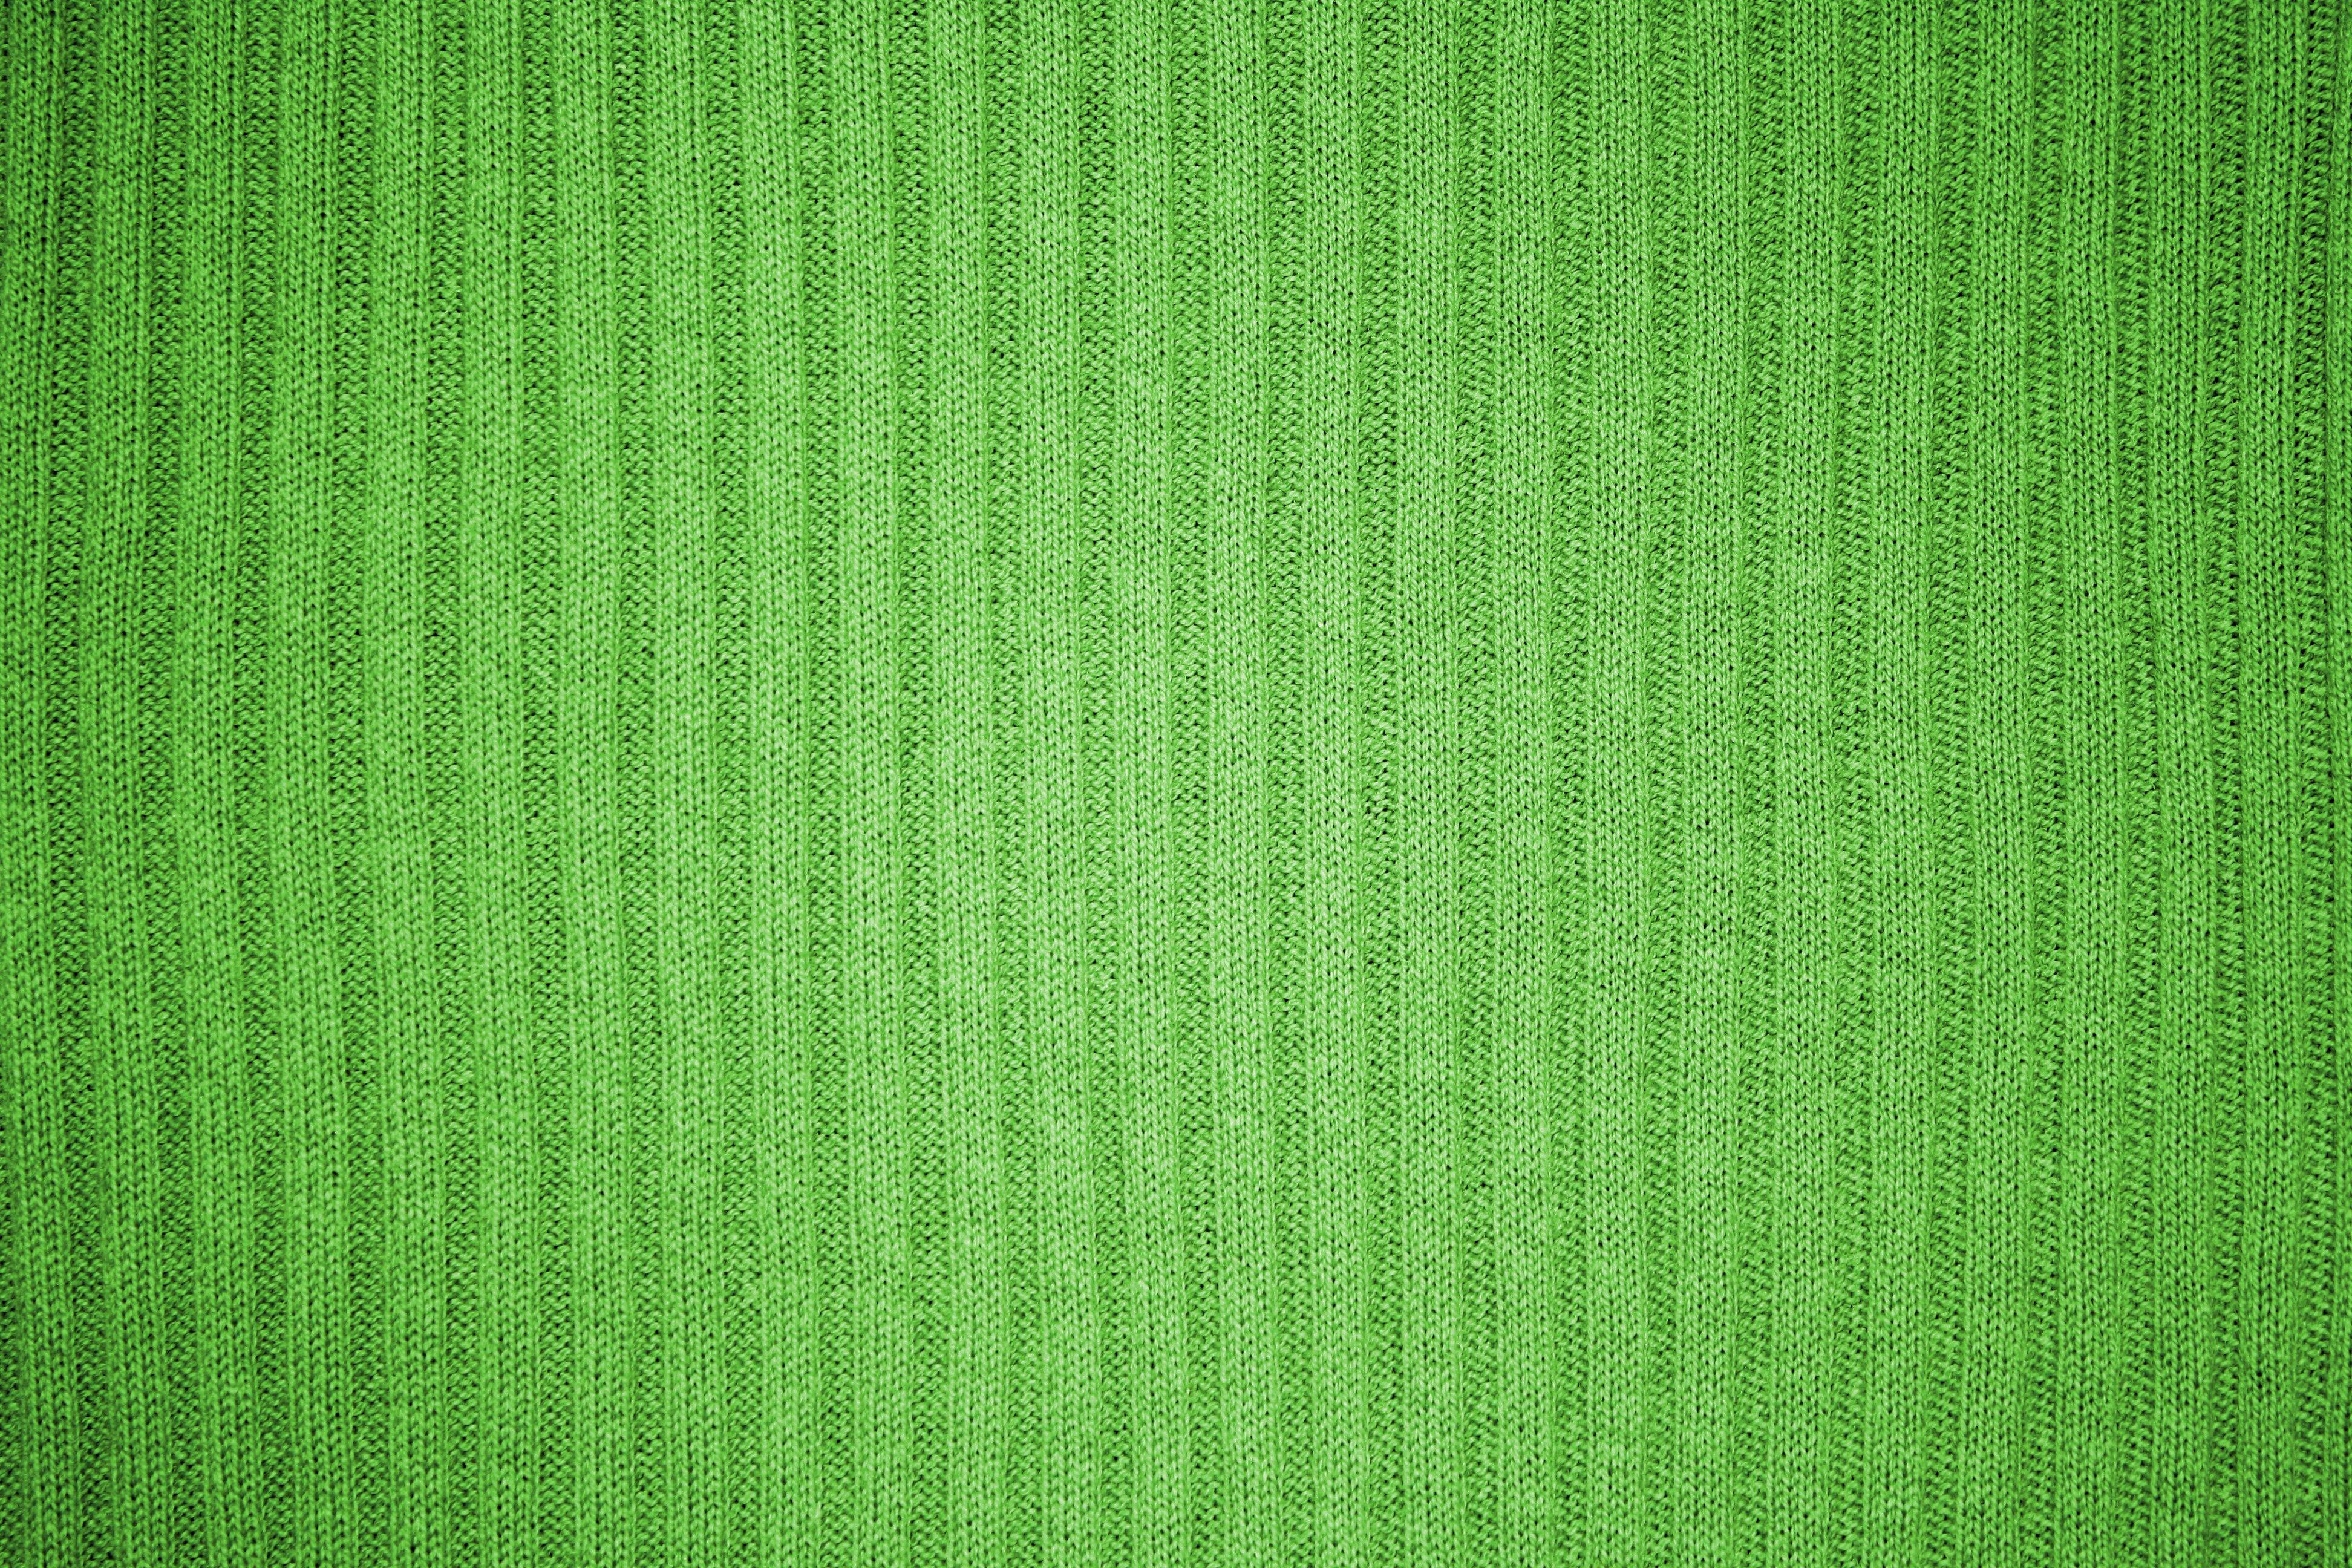 Lime Green Ribbed Knit Fabric Texture Picture, Free Photograph